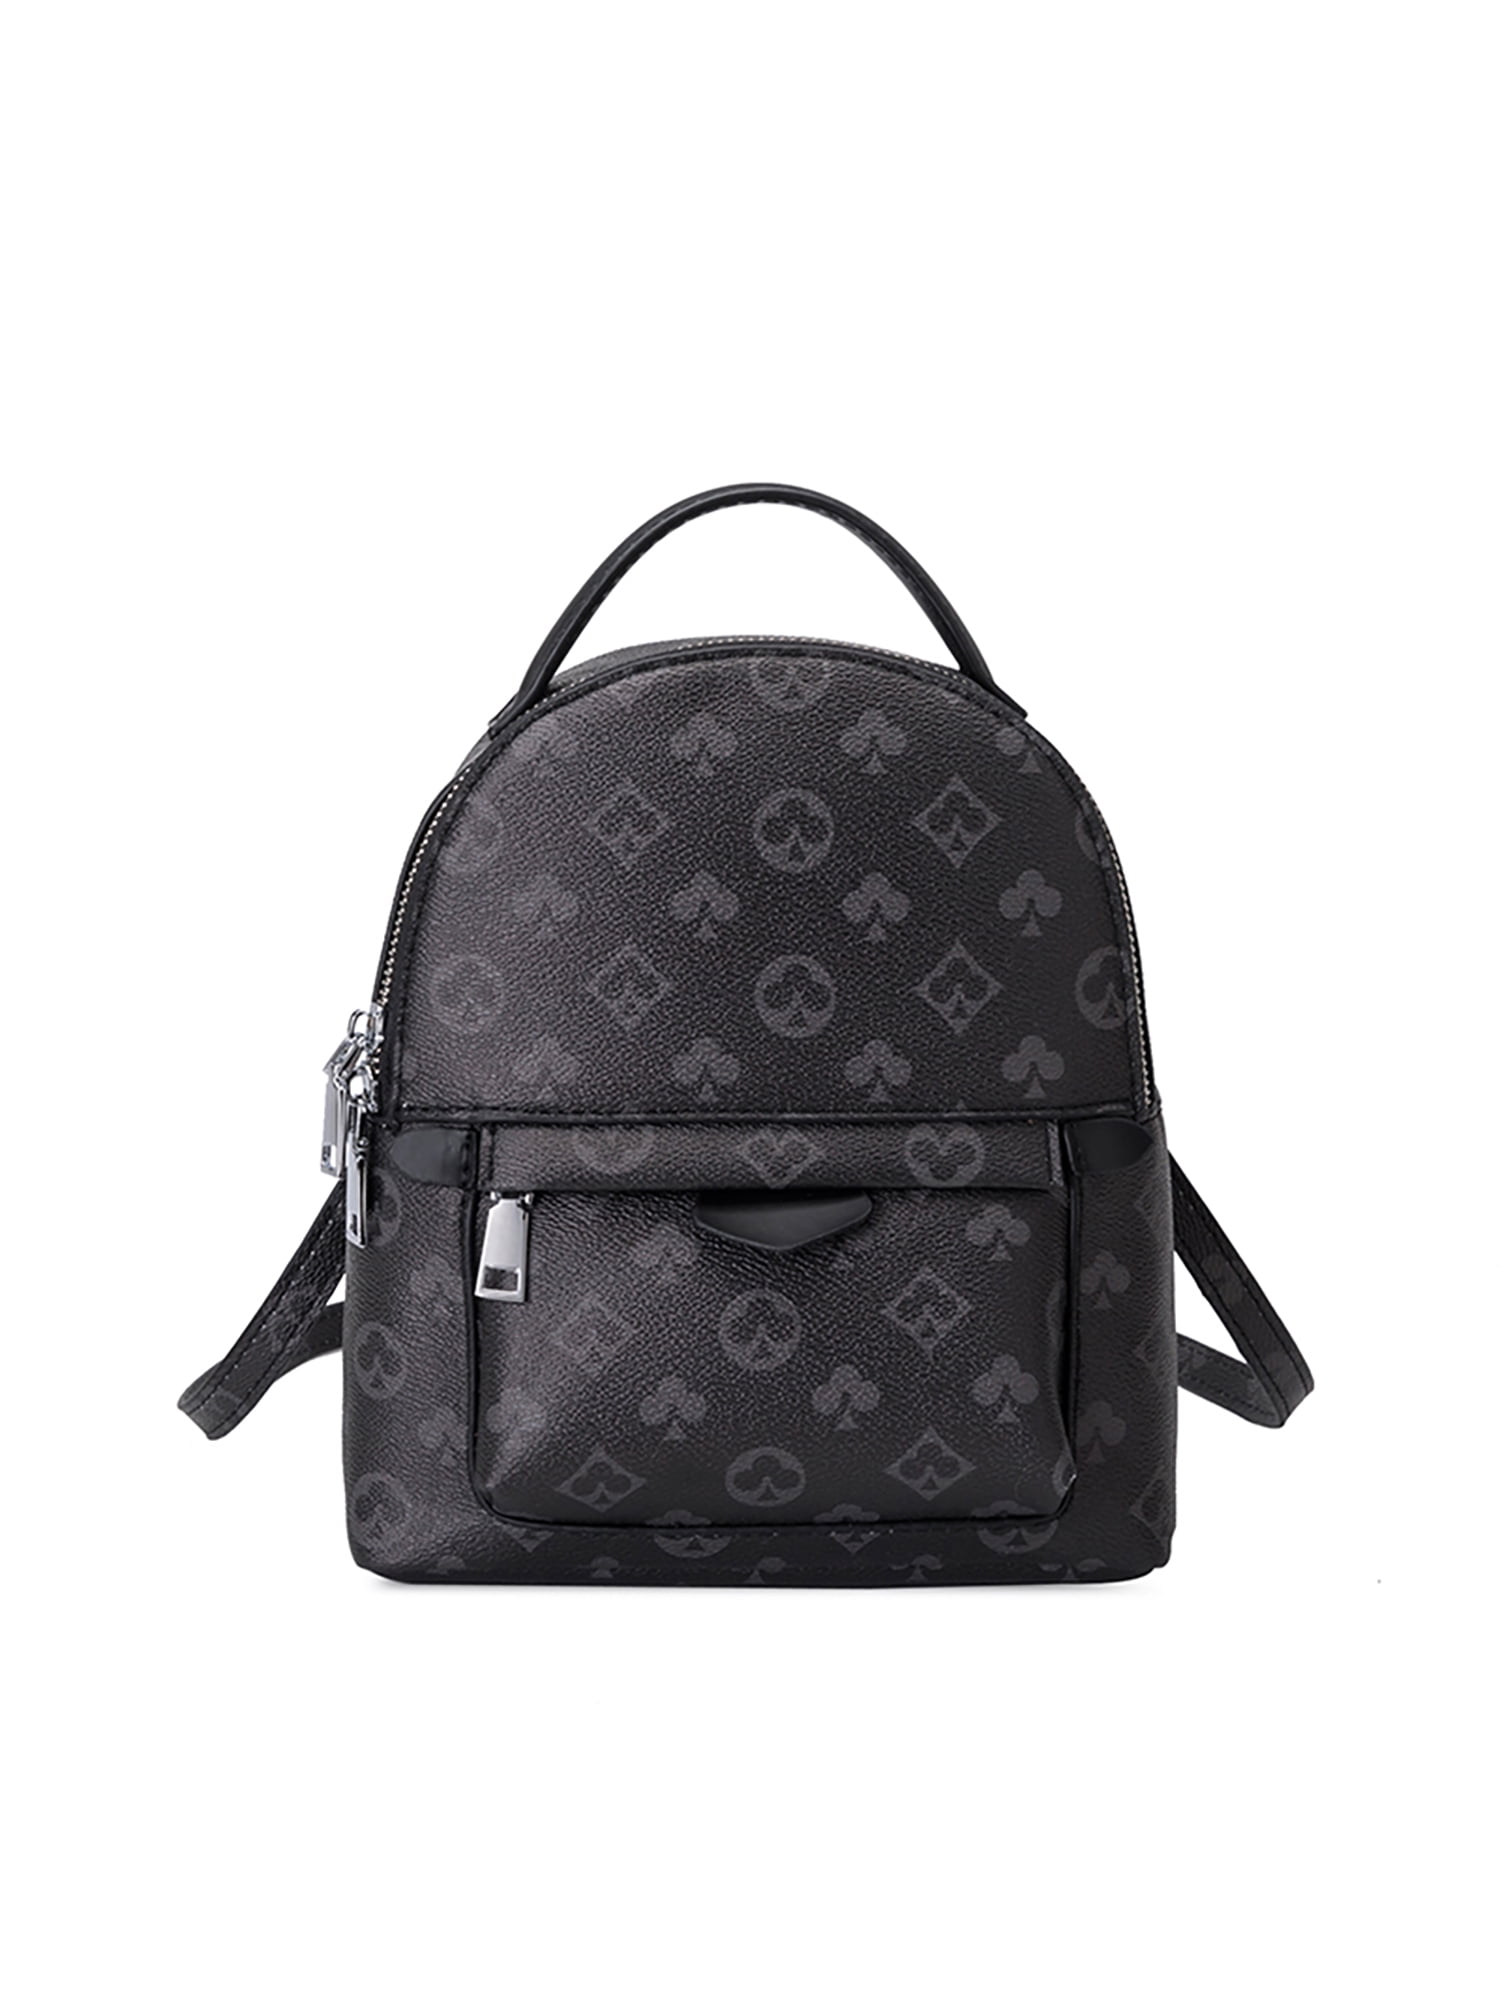 Sexy Dance Women Checkered Backpack PU Vegan Leather Knapsack Fashion  Classic Daypack School Bag Anti-Theft Rucksack Bookbag With Inner  Pouch-Black Checkered 